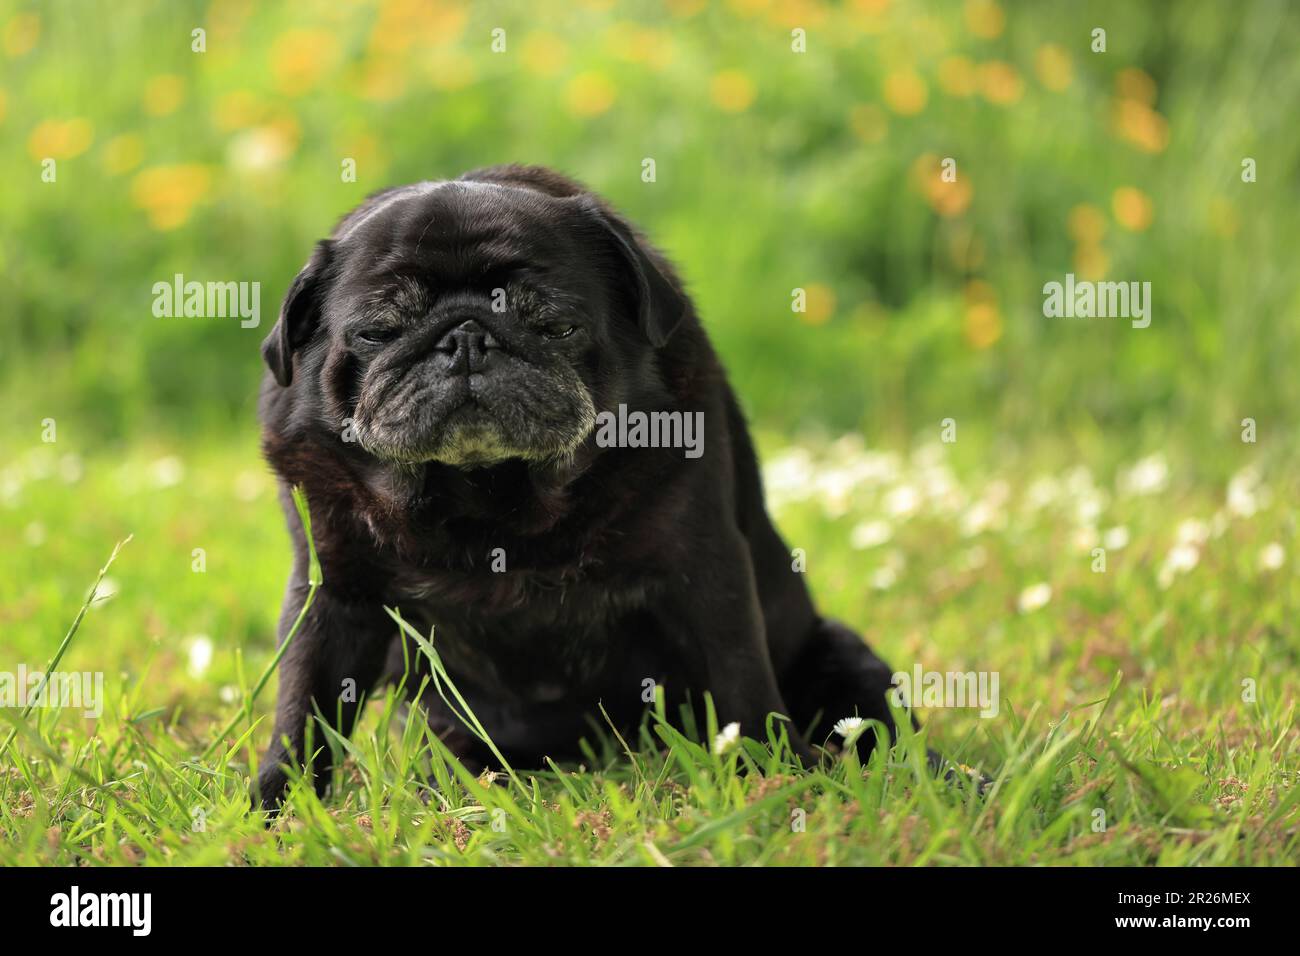 Outdoor portrait of an old black pug dog with a funny, comical or grumpy facial expression sitting in a garden with bokeh background and copy space Stock Photo